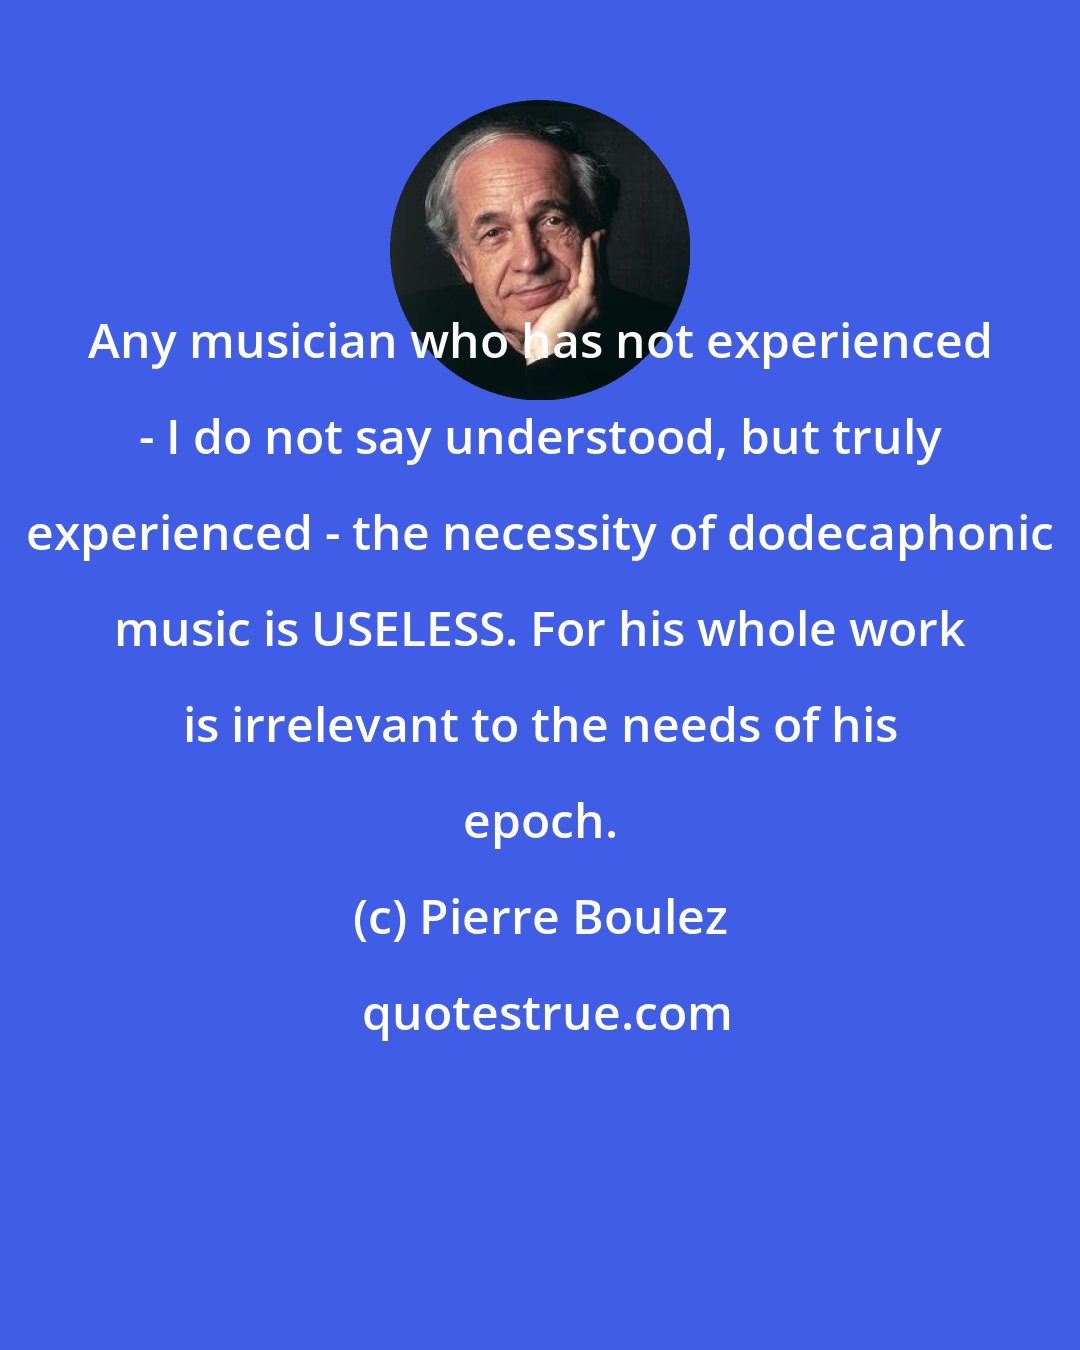 Pierre Boulez: Any musician who has not experienced - I do not say understood, but truly experienced - the necessity of dodecaphonic music is USELESS. For his whole work is irrelevant to the needs of his epoch.